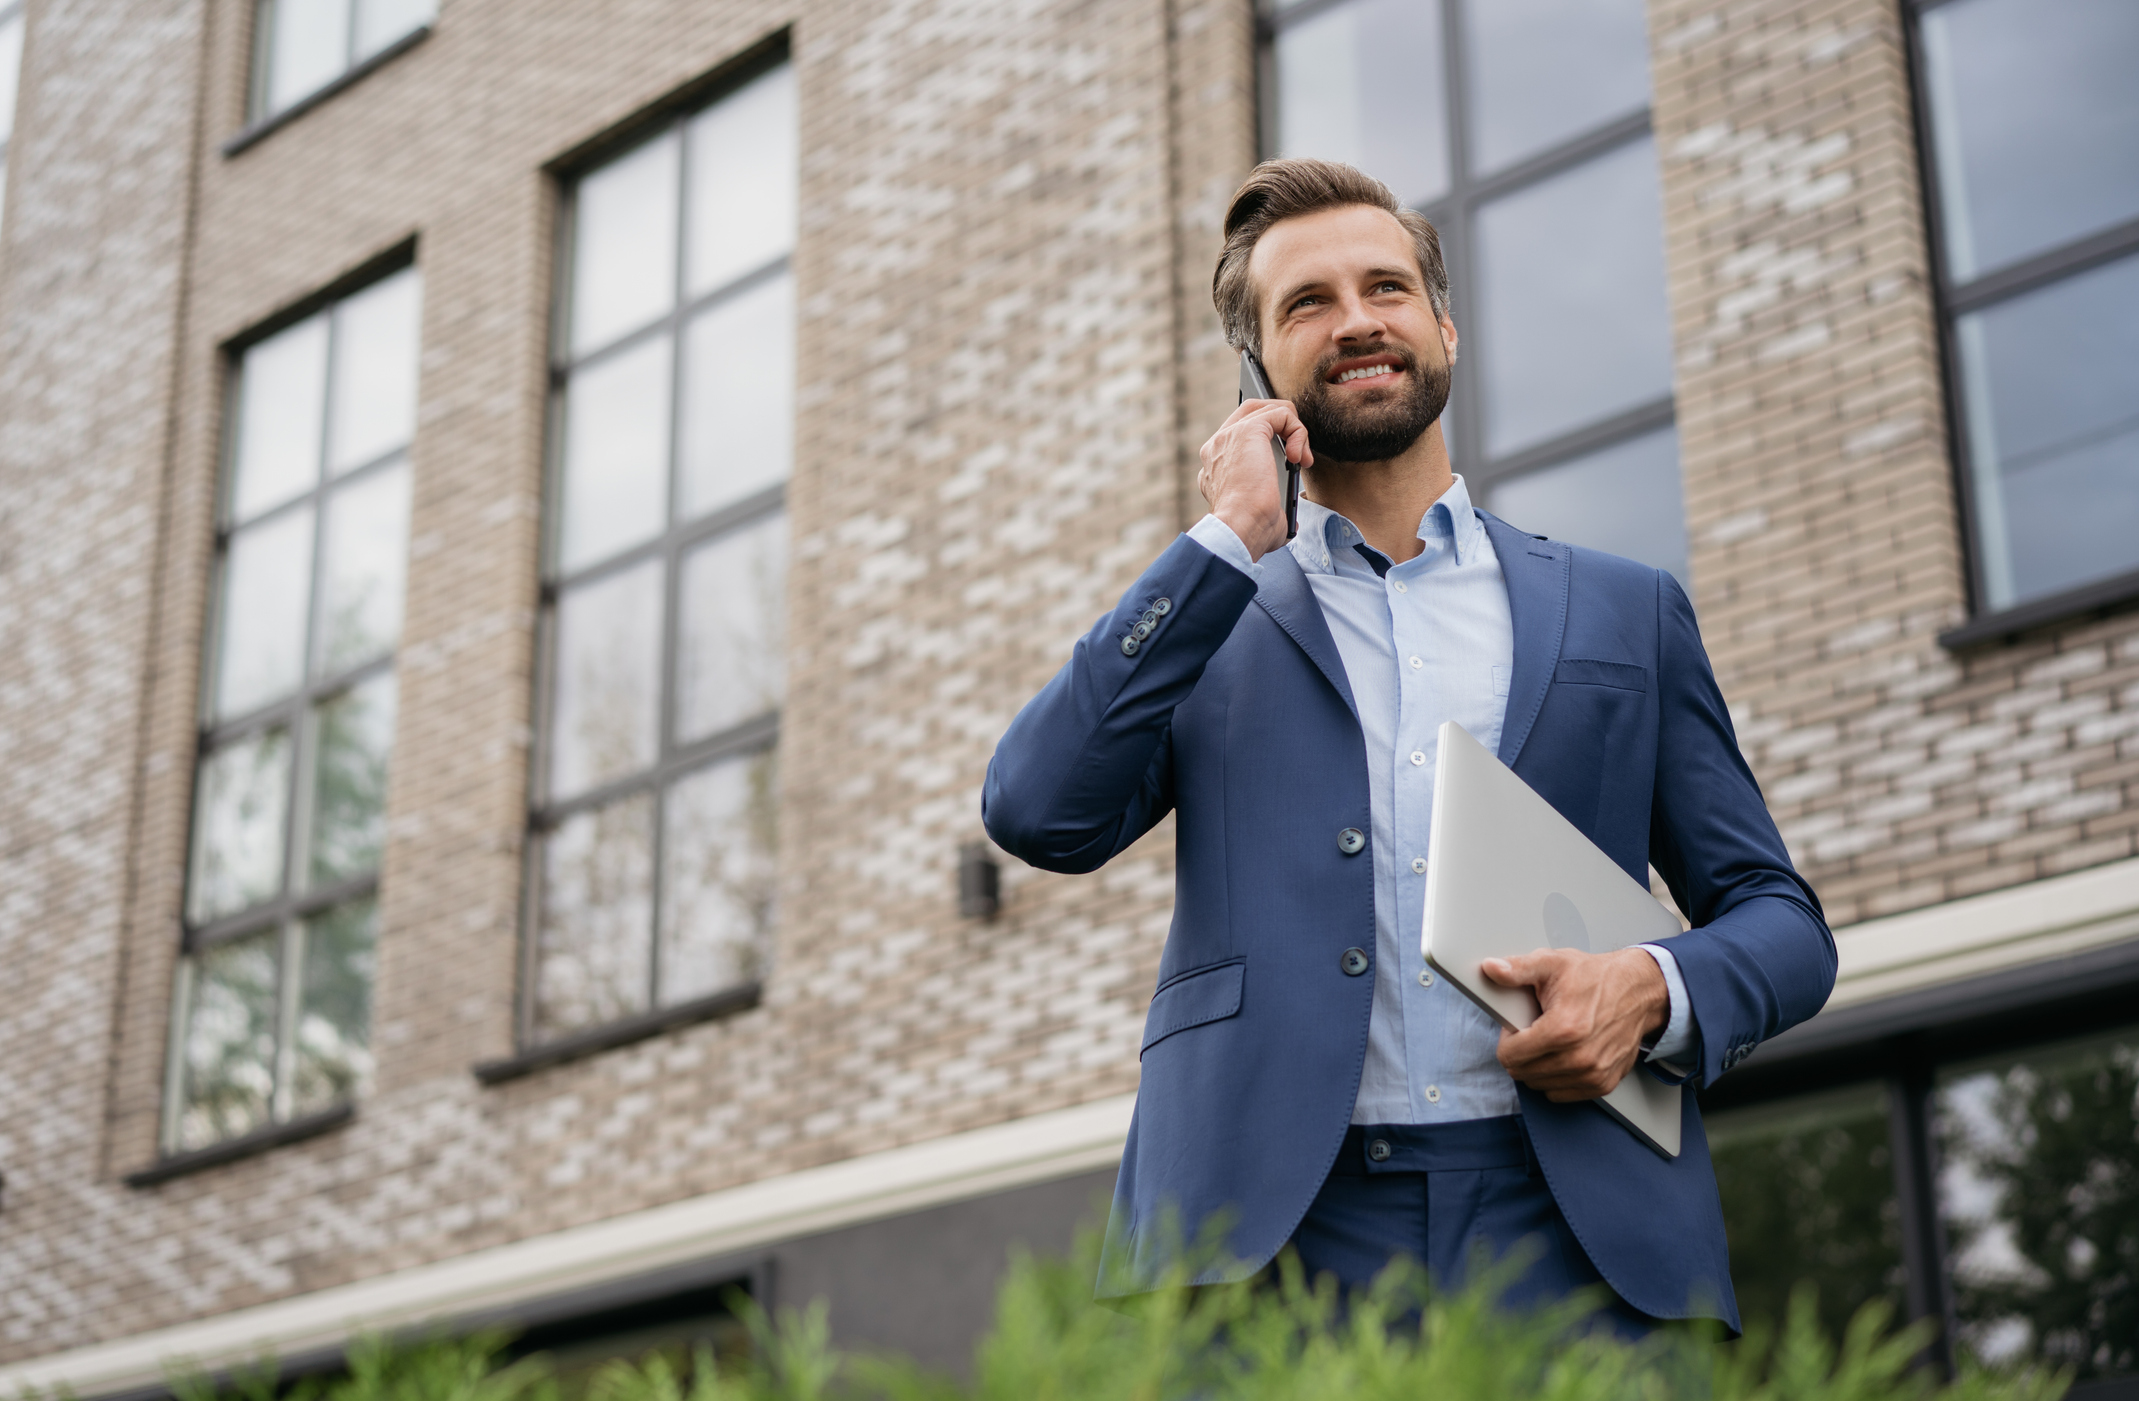 What does it mean to be a digital real estate agent?